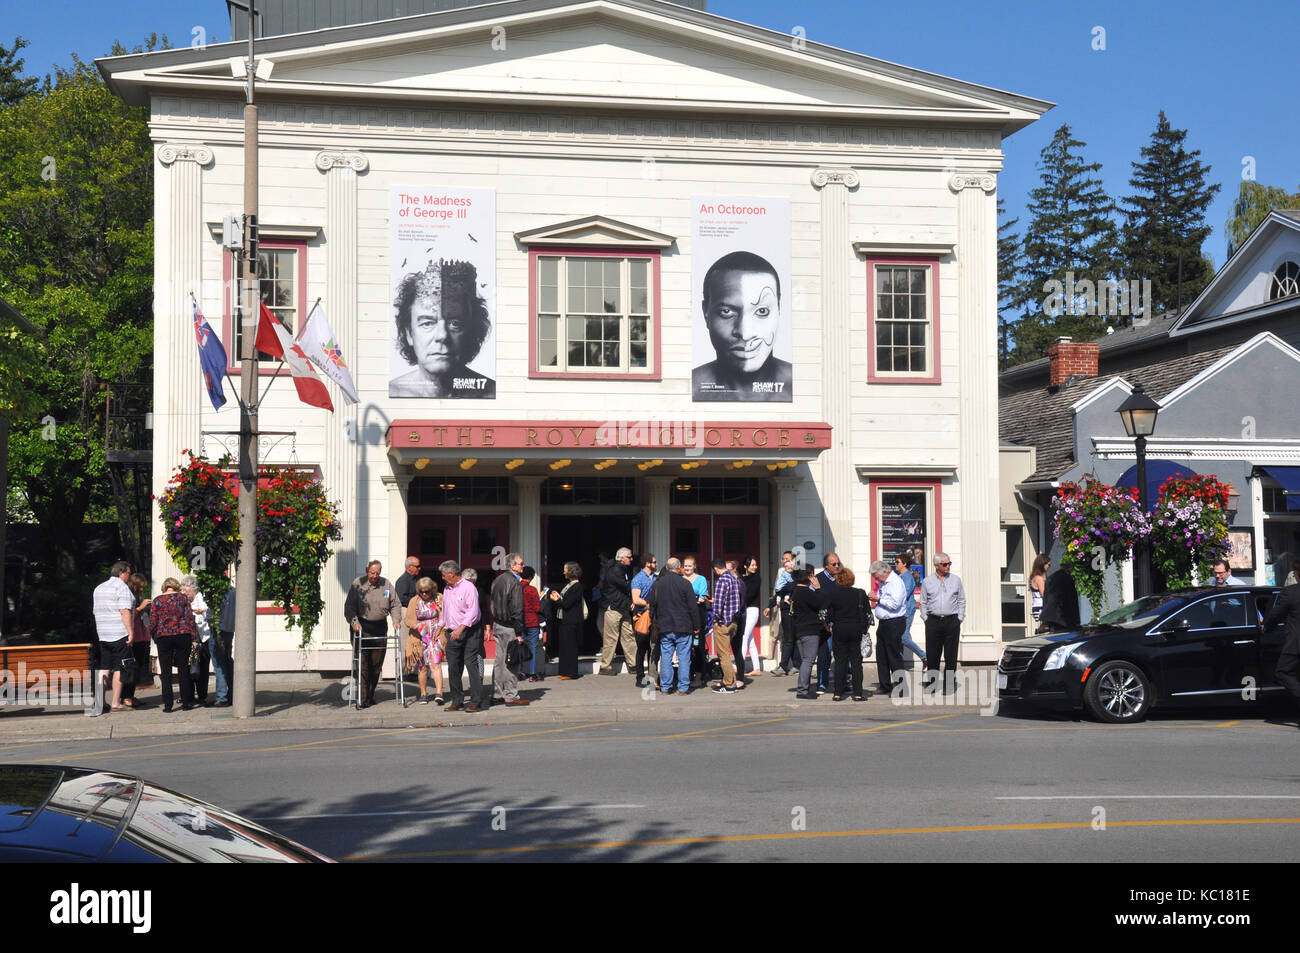 Niagara on the Lake, Ontario, Canada - September 10, 2017 - Crowd outside the Royal George Theater, Shaw Festival with People - Editorial Image Stock Photo